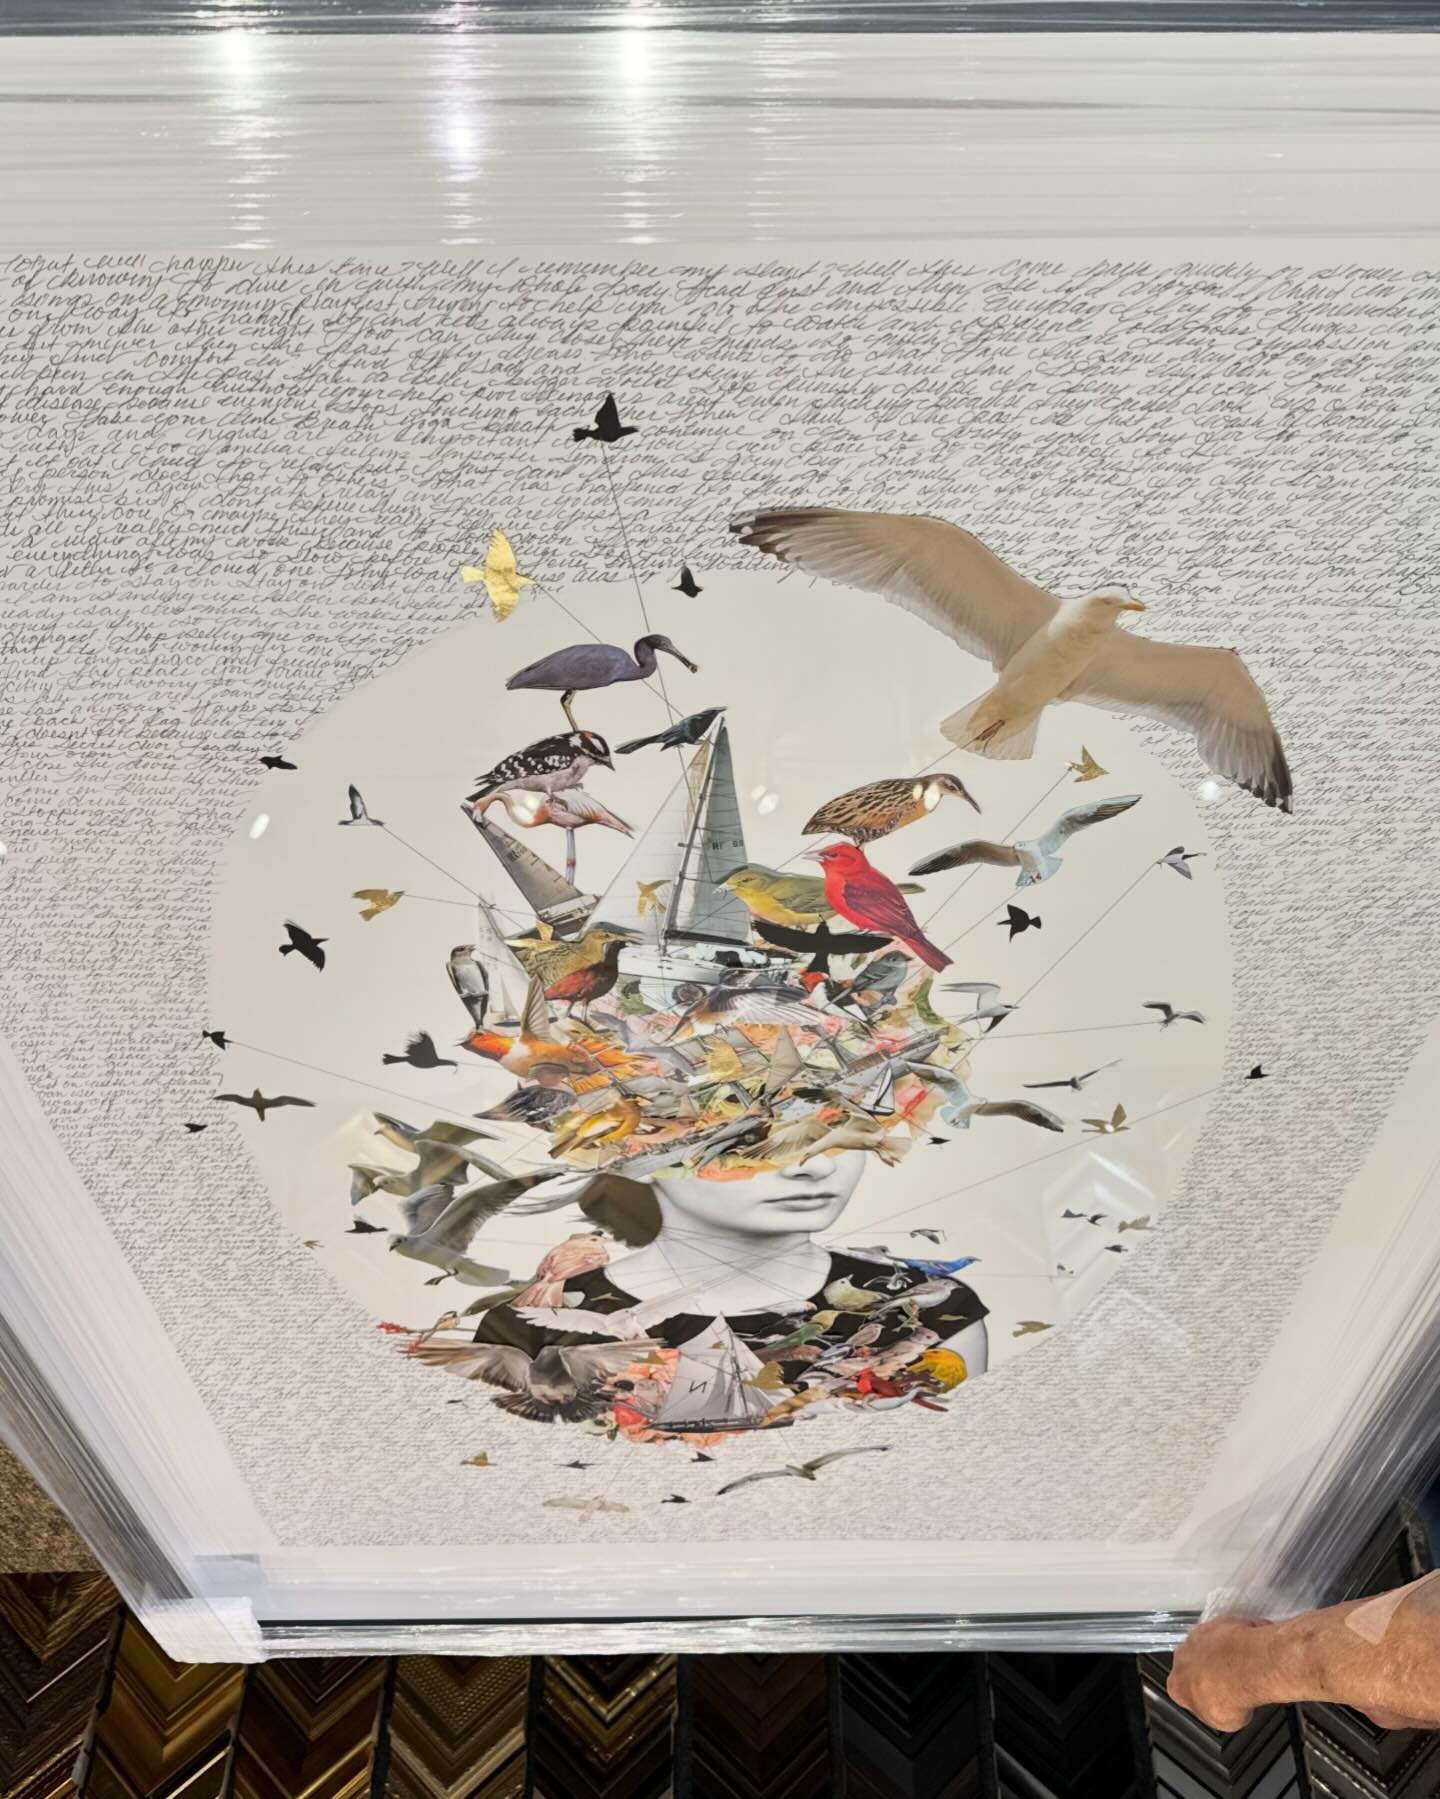 This amazing large piece by @mercedes_jelinek has flown away to #MirrorballGallery from NYC to the framers in Hendersonville and to its new home in our gallery in Tryon! 

#unbelievable #art #artist #artistsoninstagram #birds #floral #photography #ga